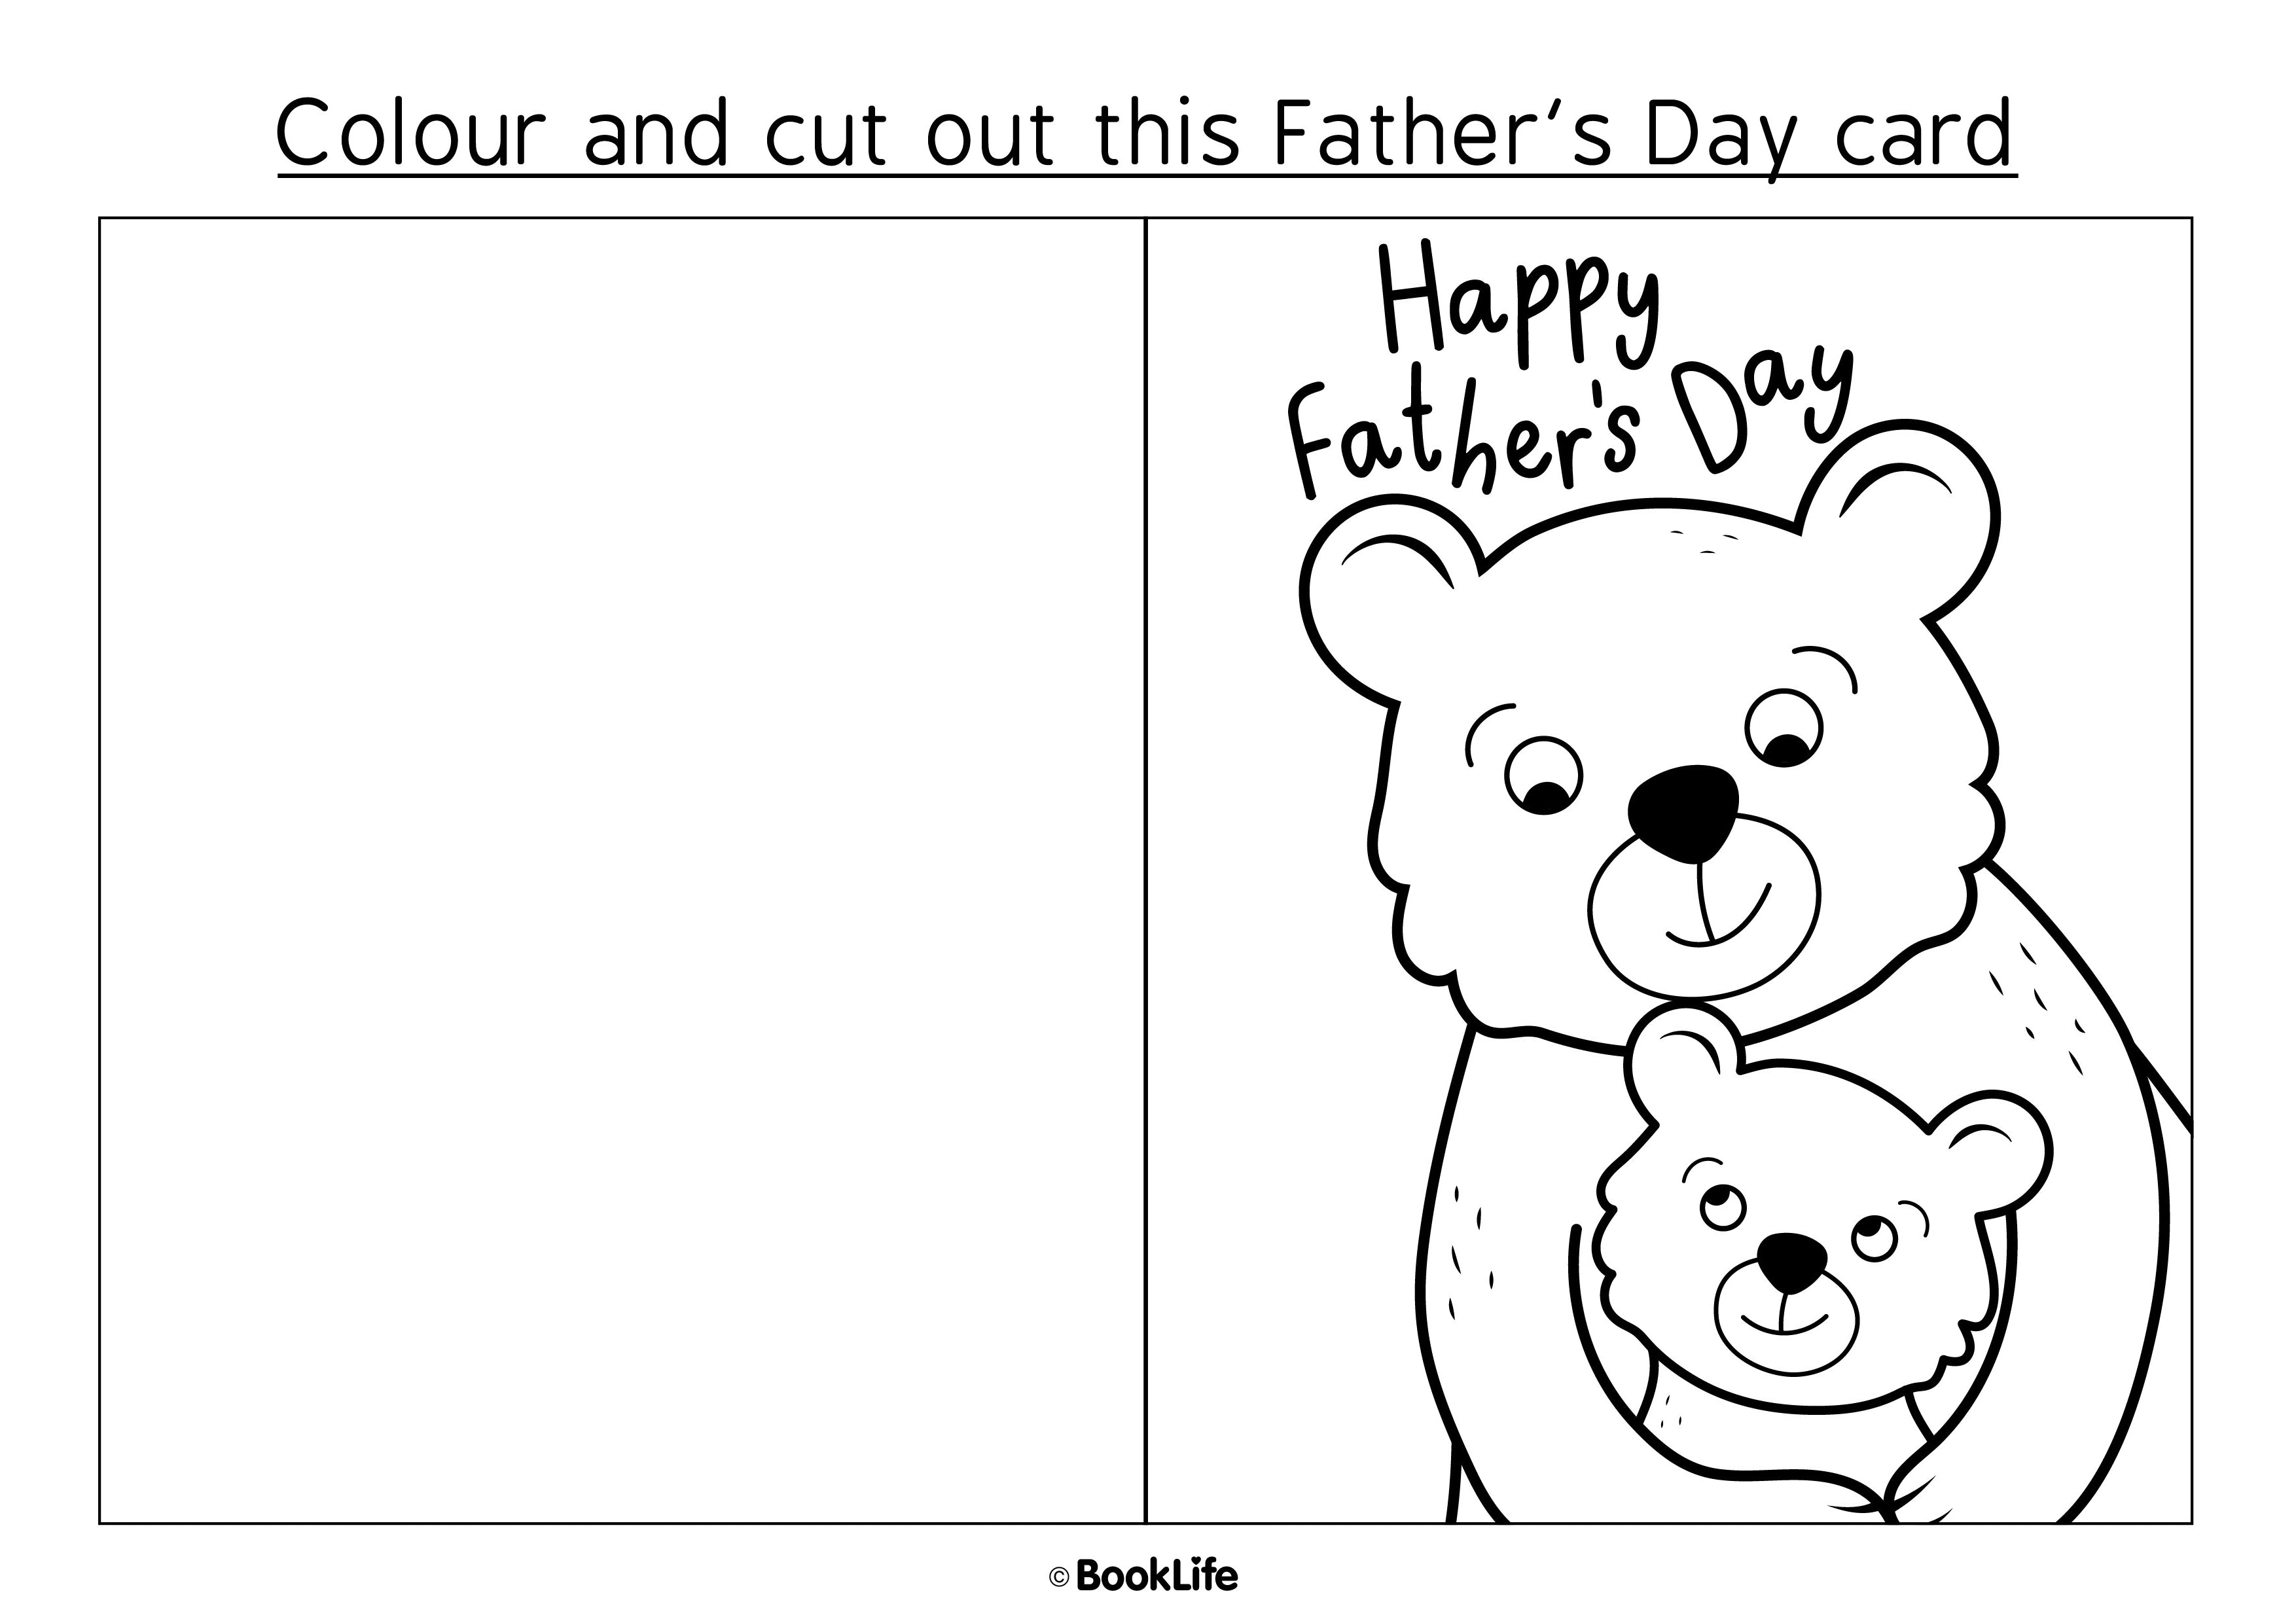 Father's Day Teddy Colour and Cut Out Card